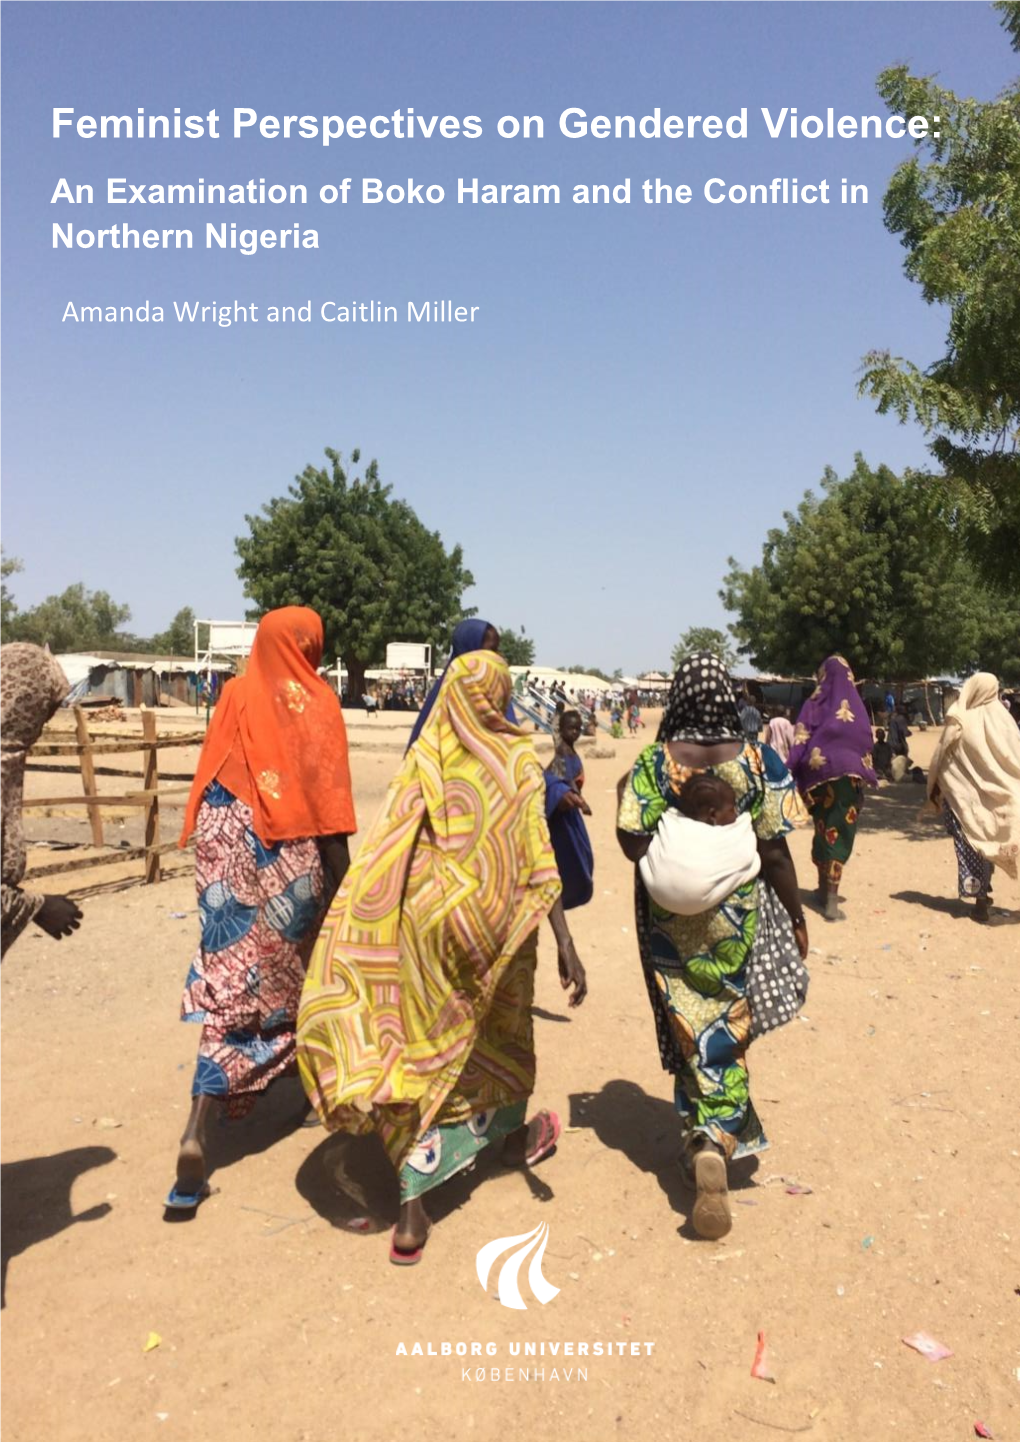 Feminist Perspectives on Gendered Violence: an Examination of Boko Haram and the Conflict In